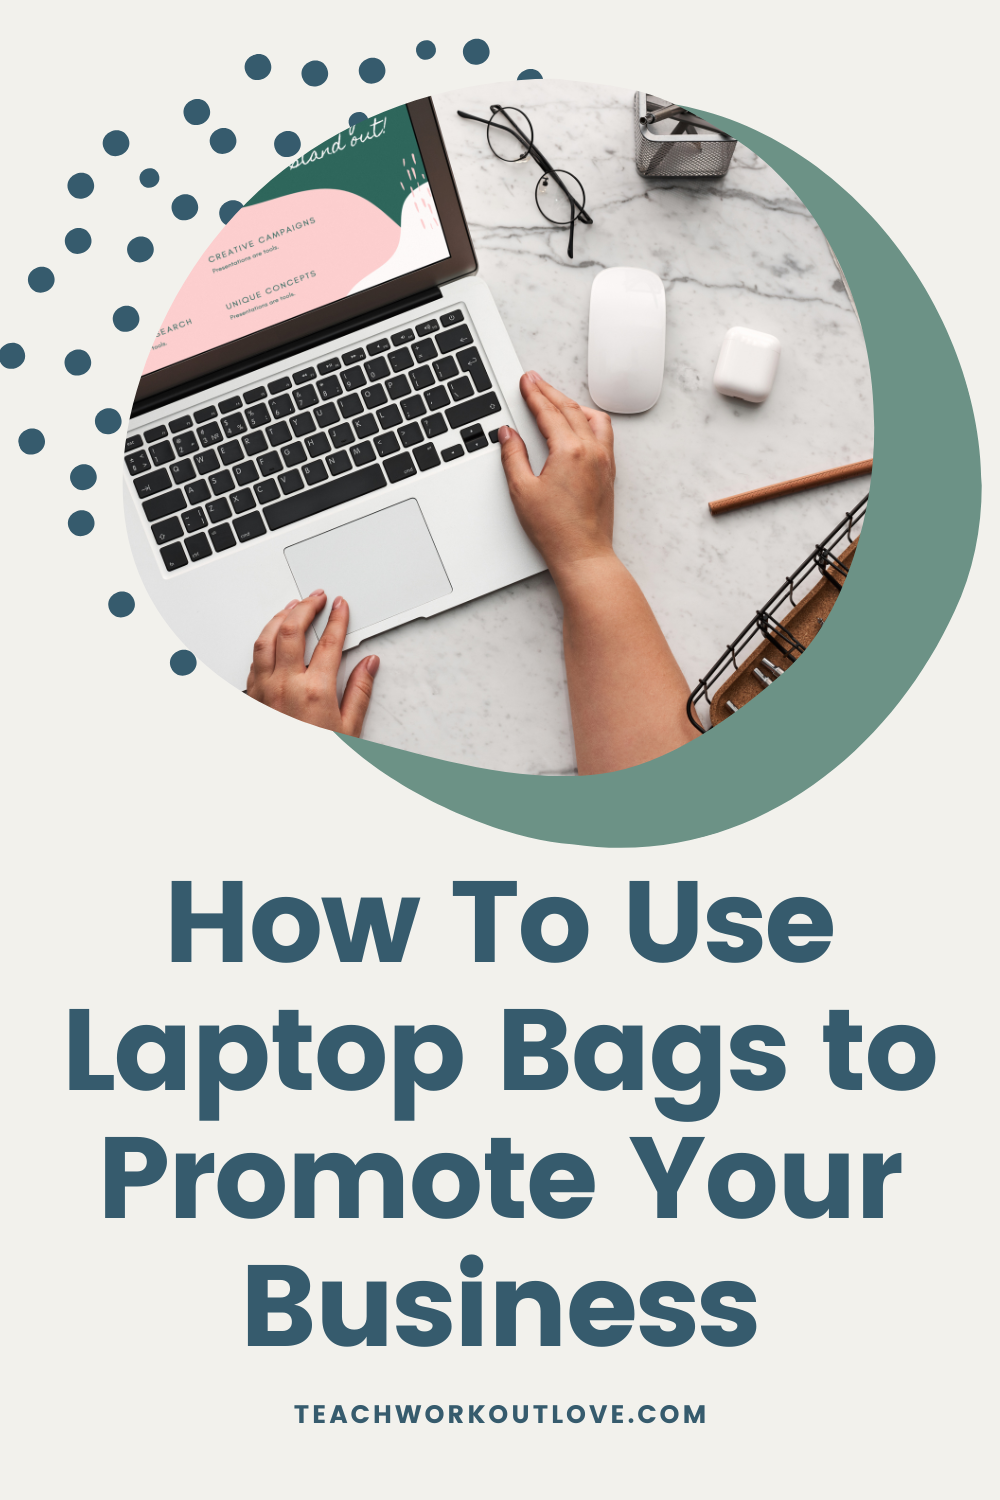 One of the promotional materials you can use is custom laptop bags. If you want to use this strategy, then you need this article.